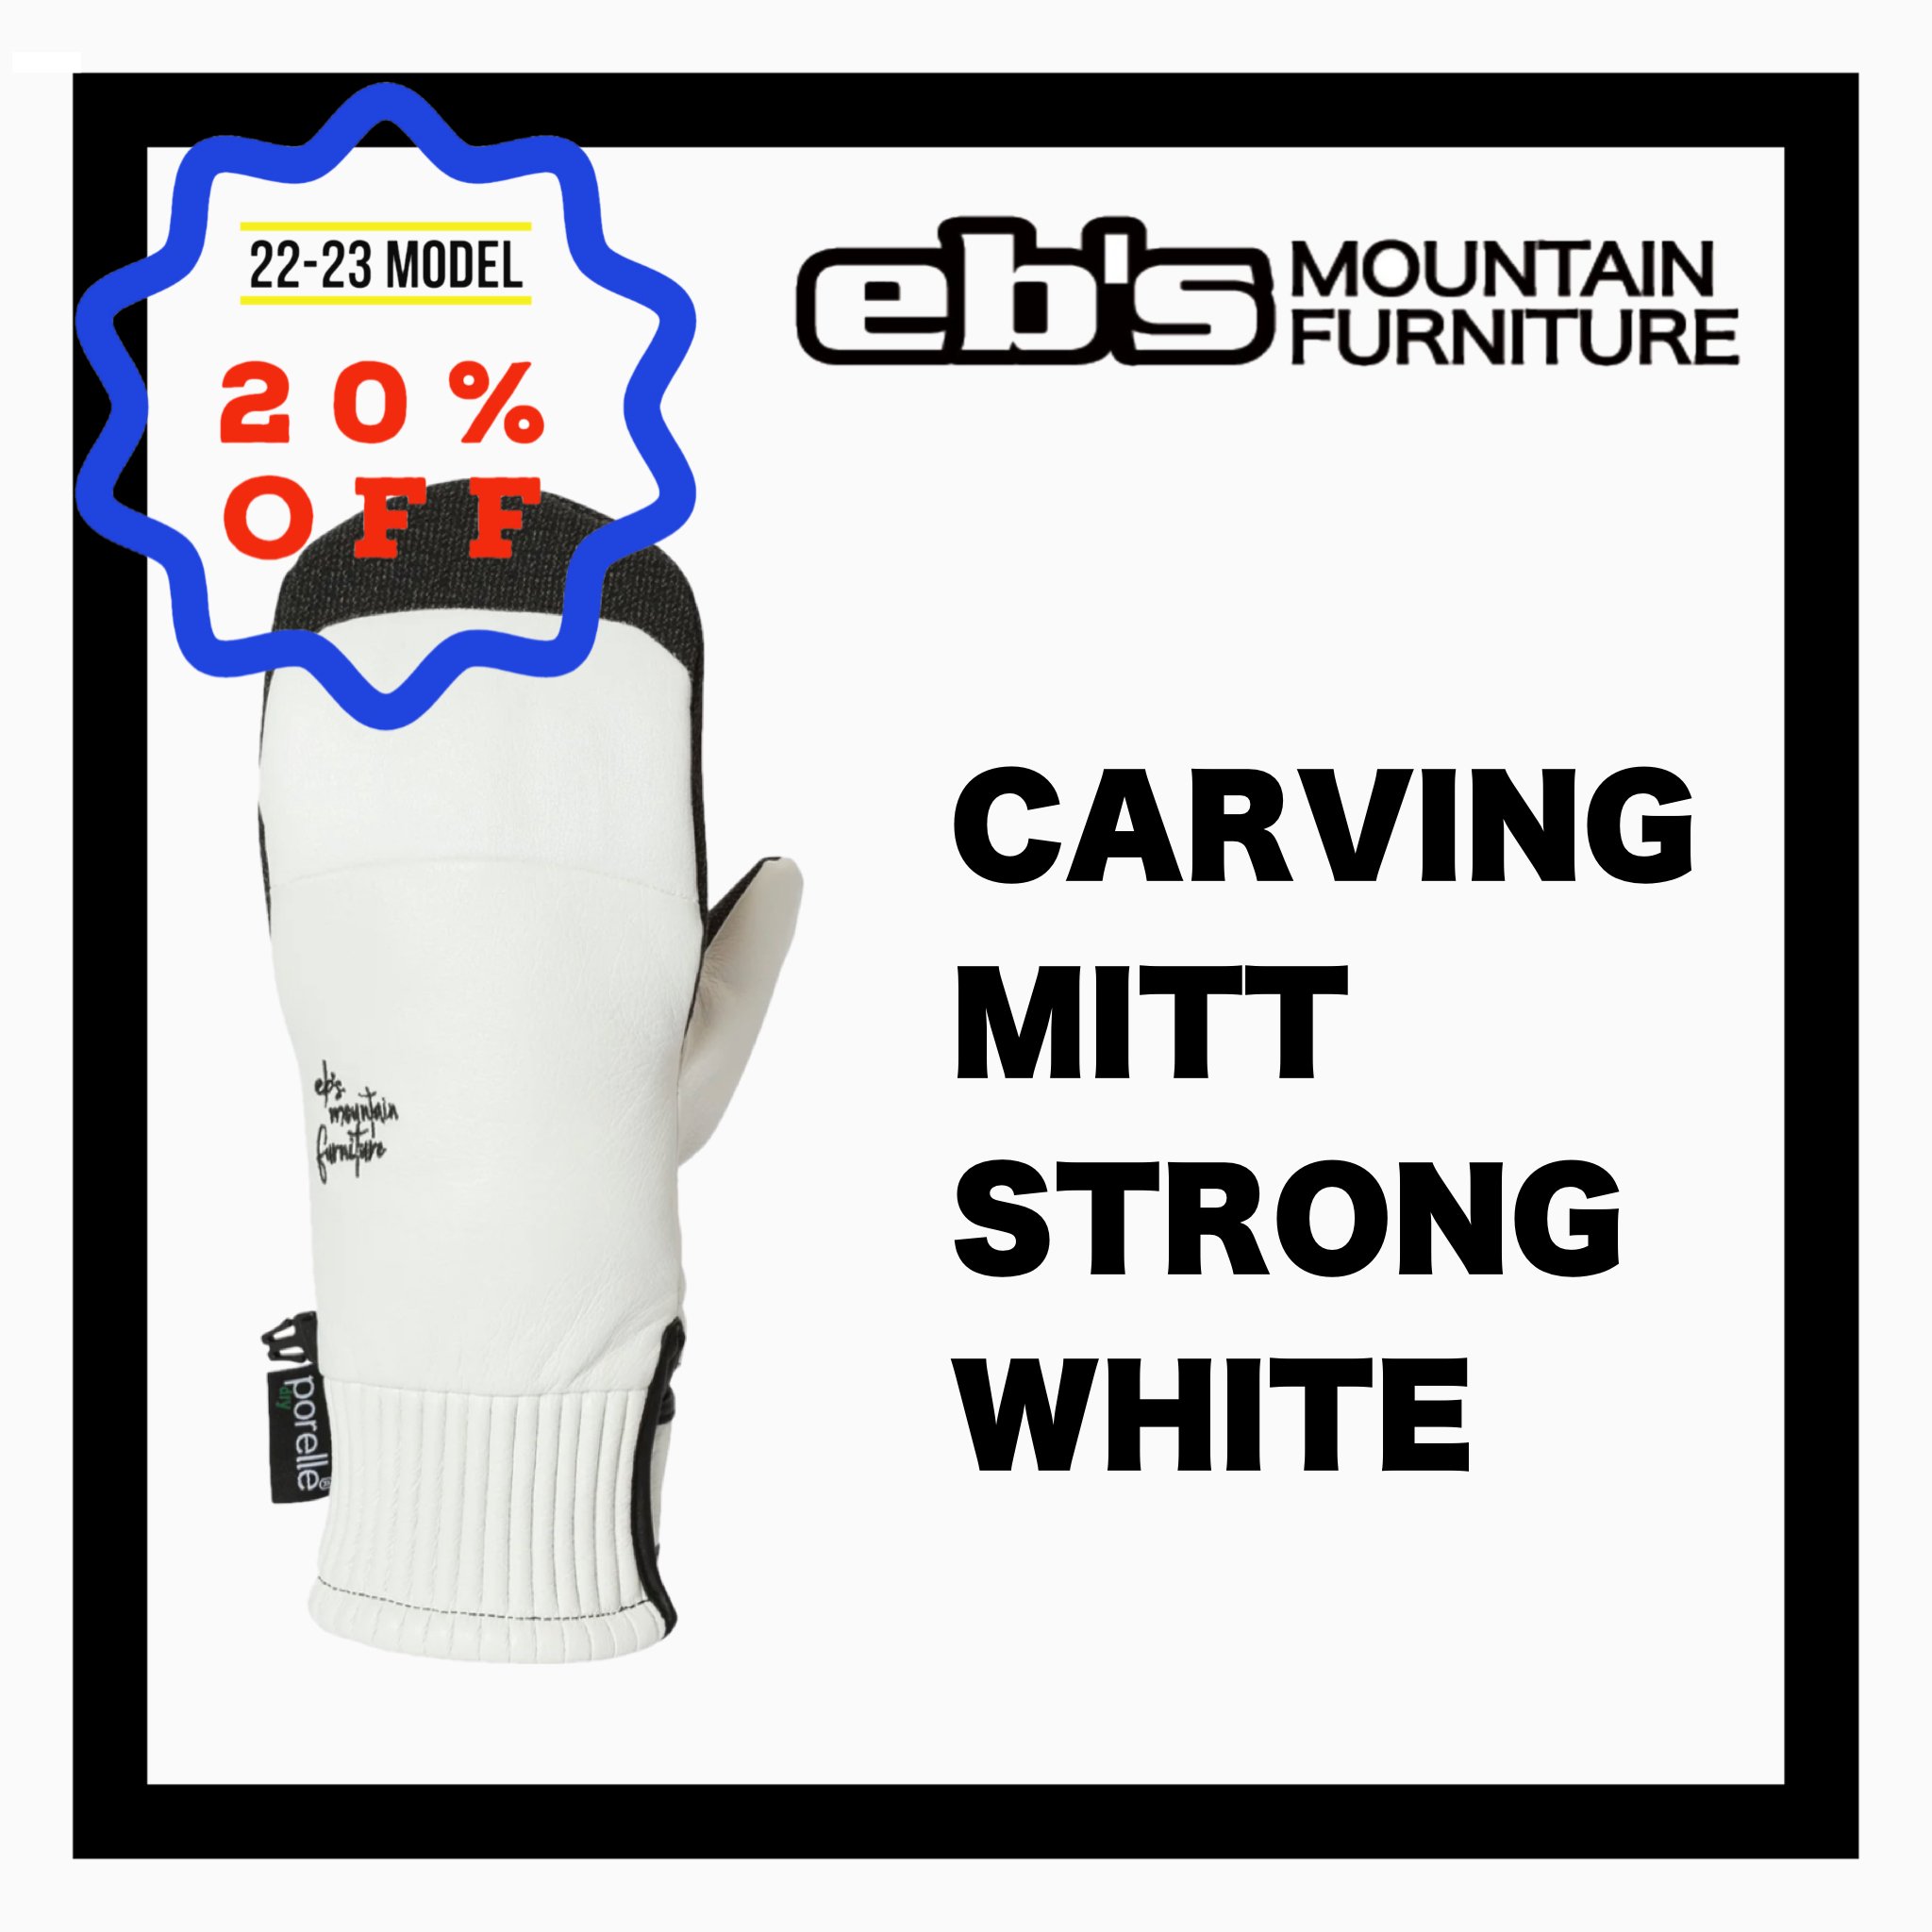 eb'sCARVING MITT / STRONG WHITE